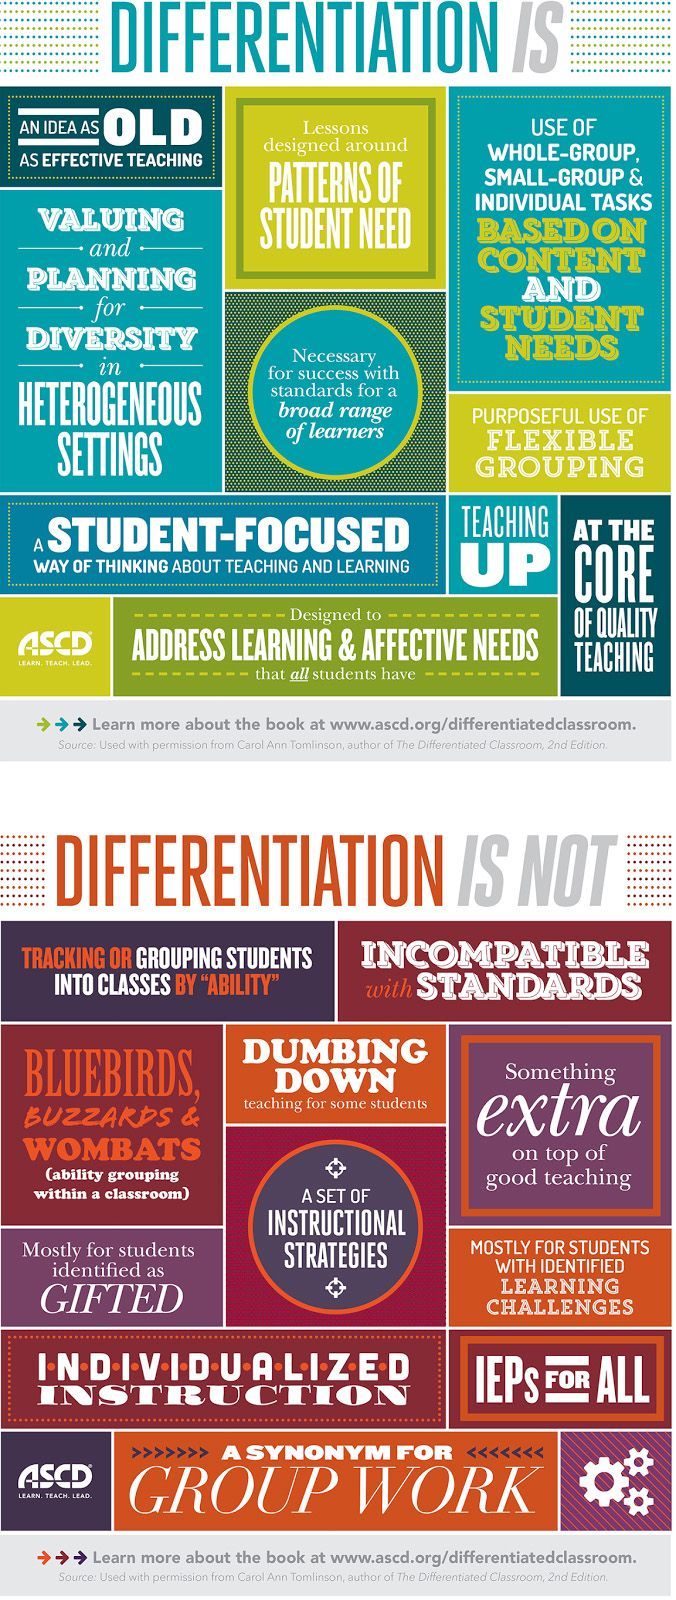 What exactly is differentiated instruction? A handy infographic from @ASCD helps explain.